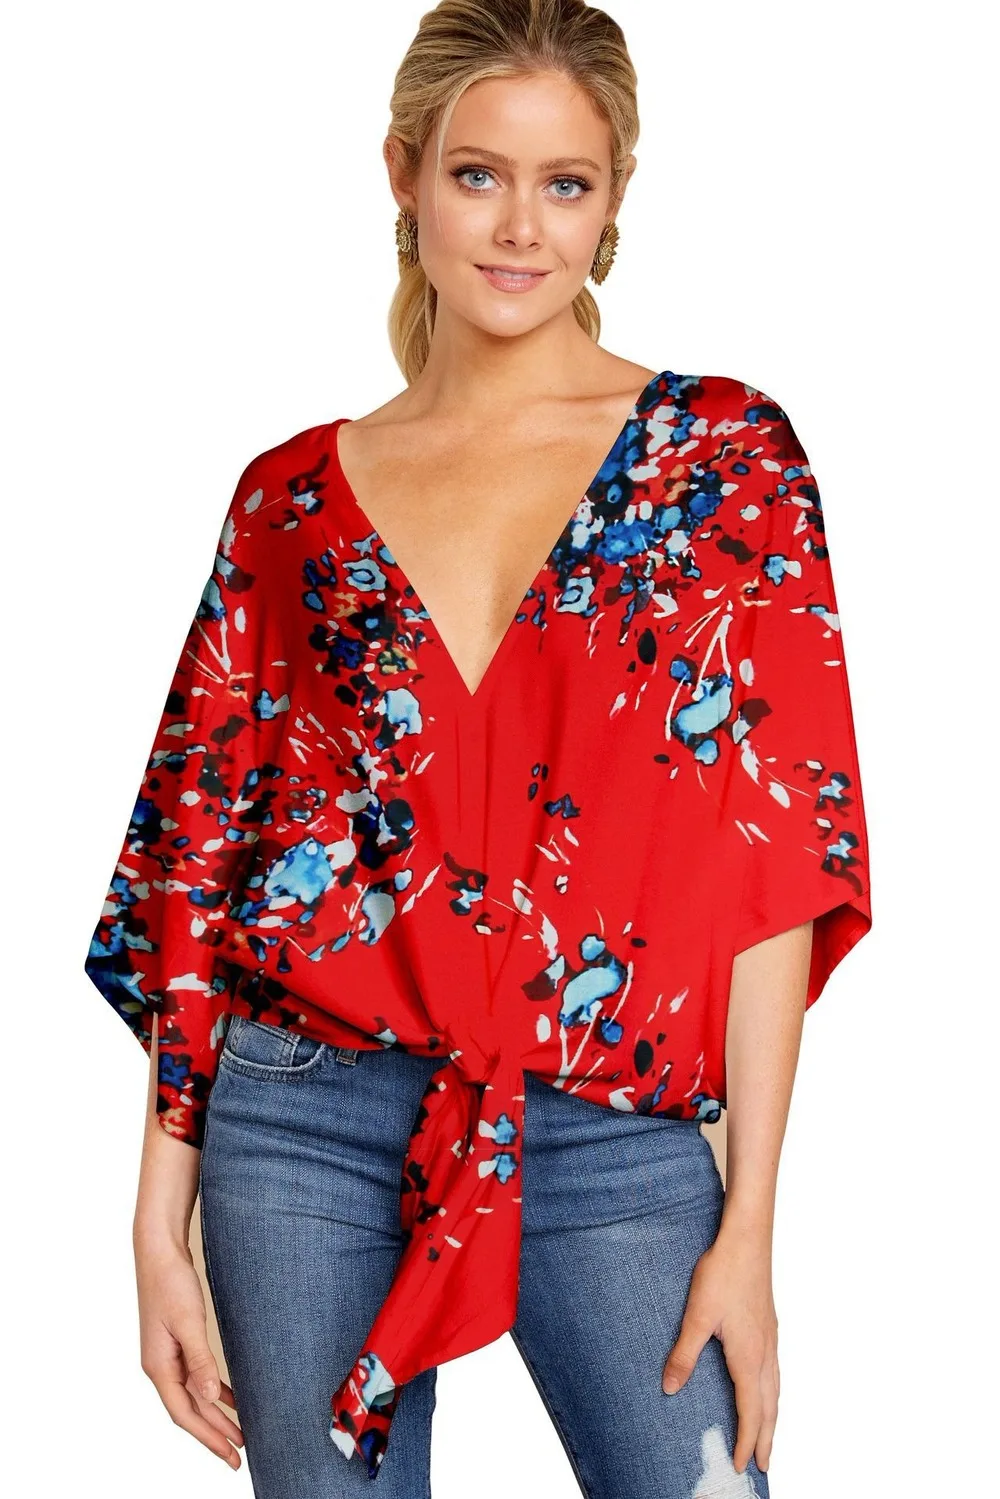 

Sandro Rivers Women's Casual Floral Blouse Batwing Long Sleeve Loose Fitting T-Shirts Boho Knot Front V-neck Tops